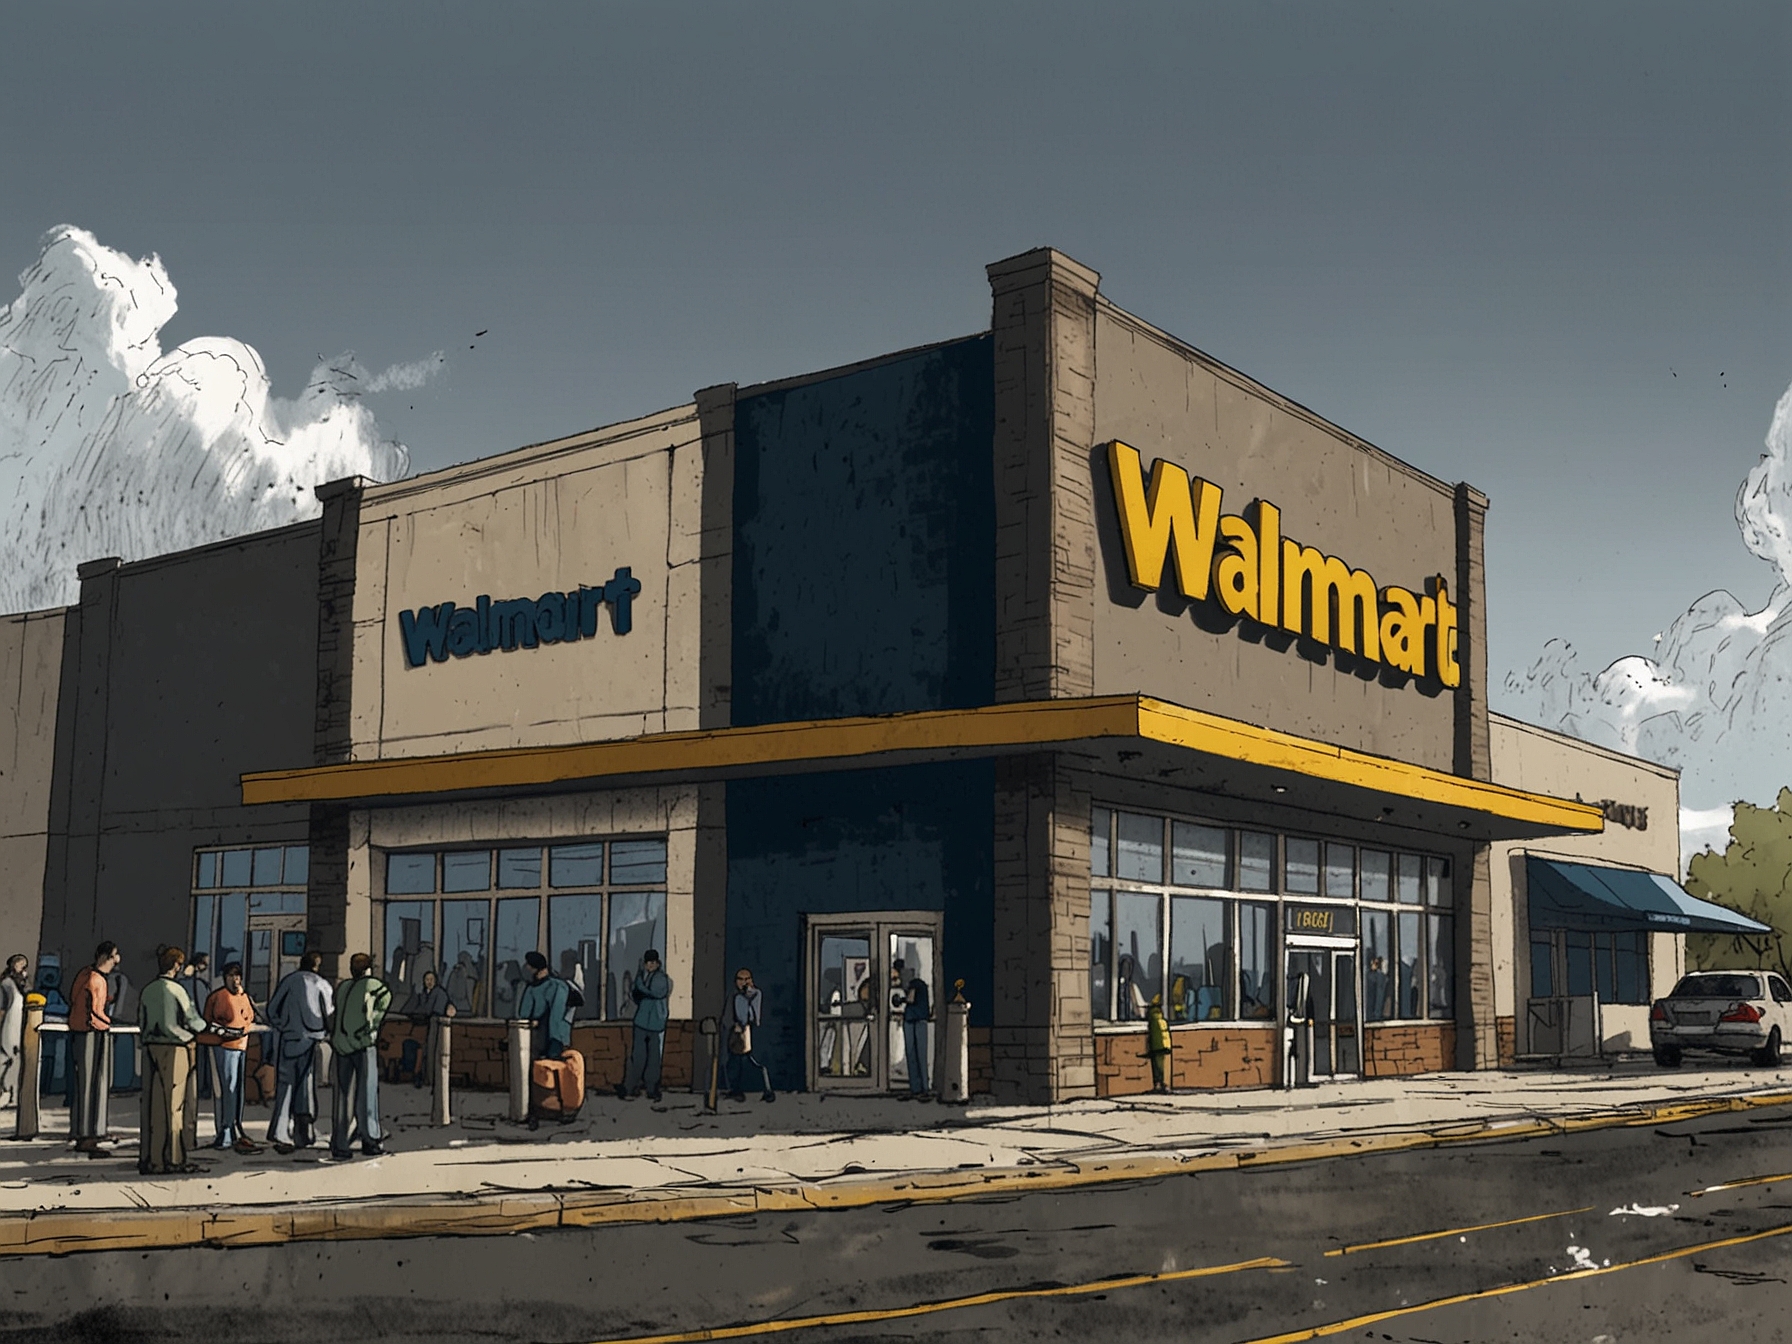 A bustling Walmart store symbolizing its consistent dividend payouts, contrasted with a tool company’s factory, showcasing the dual investment opportunity in stable and high-yield stocks.